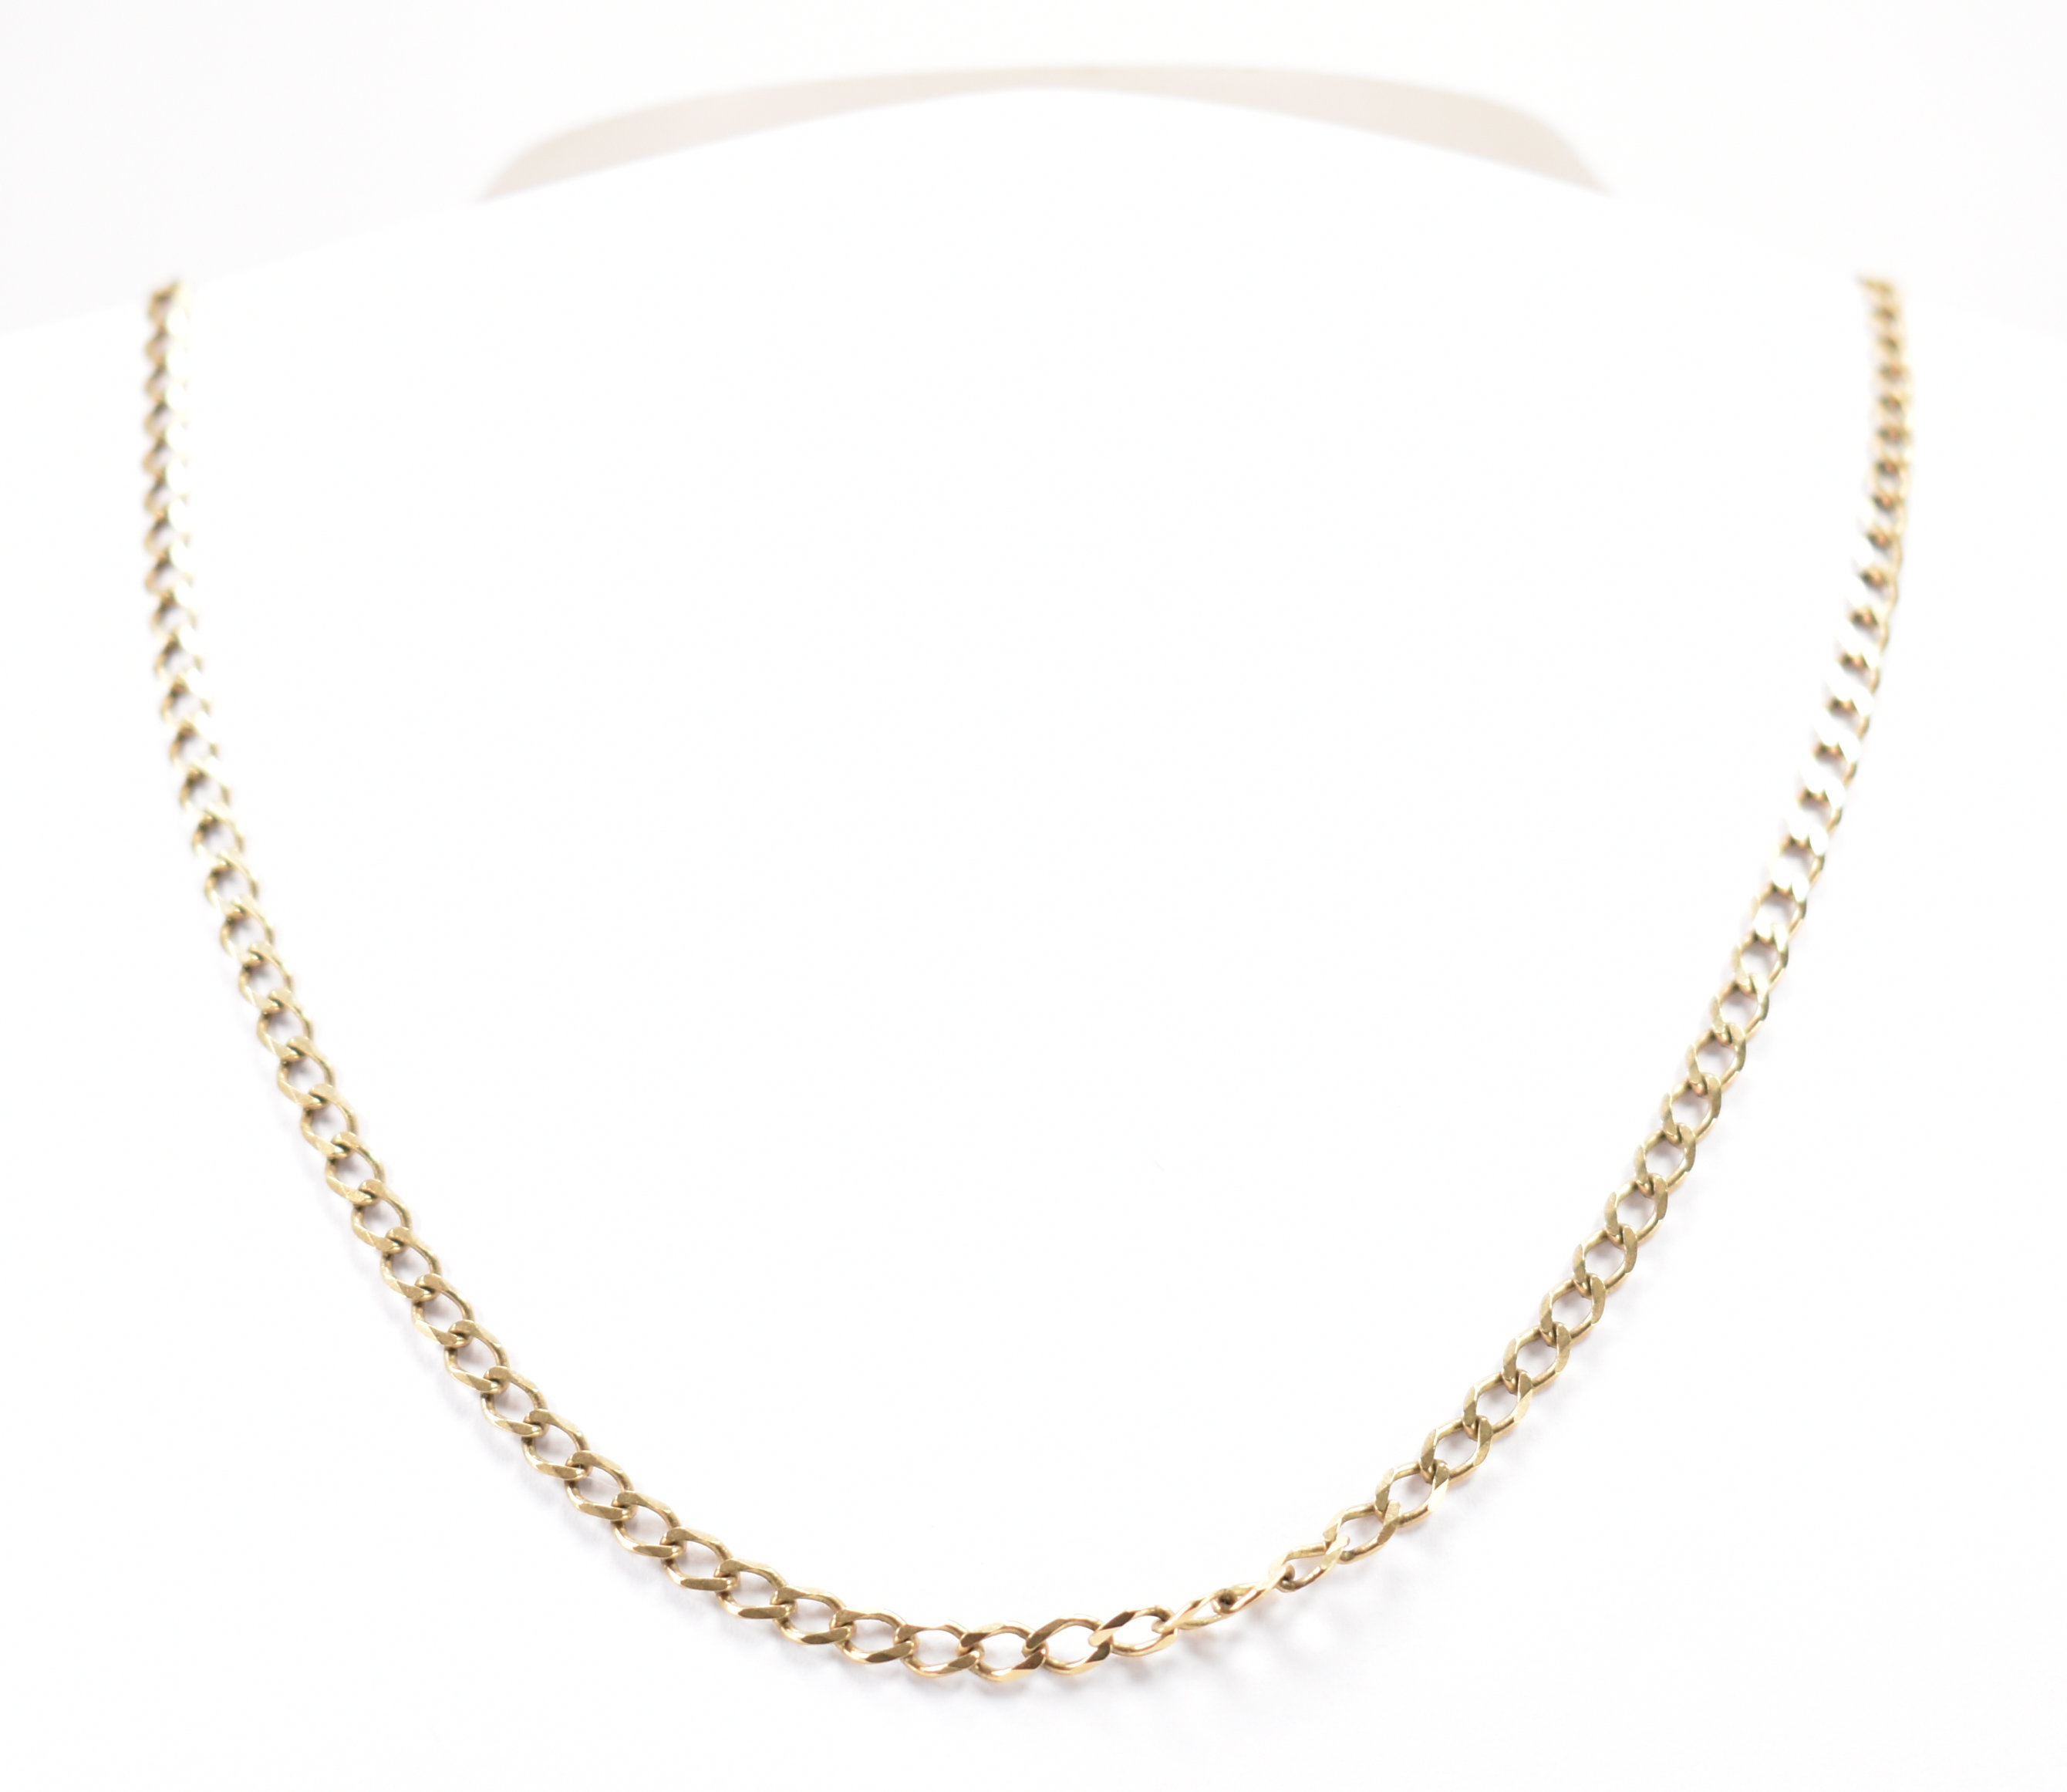 HALLMARKED 9CT GOLD FLAT LINK NECKLACE CHAIN - Image 2 of 6